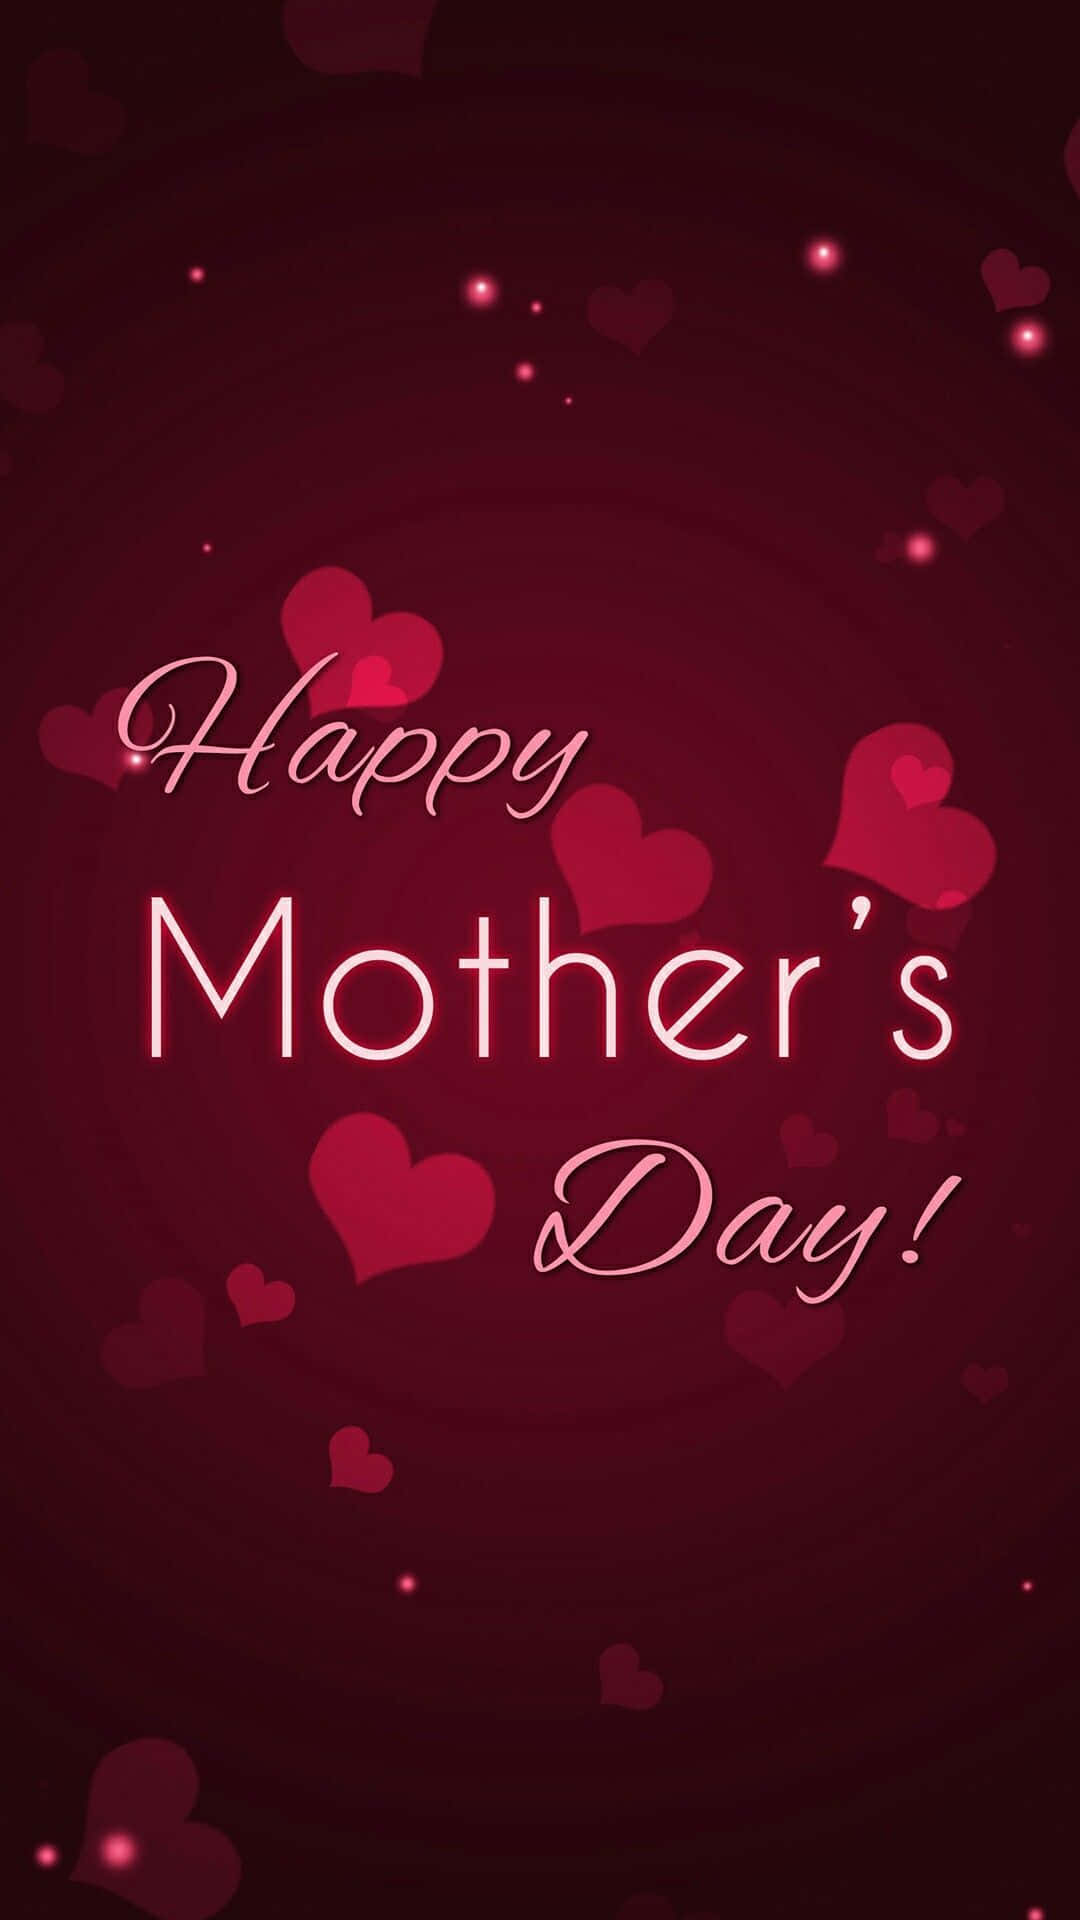 "Celebrate this special day with the one who loves you unconditionally- Happy Mother's Day!"